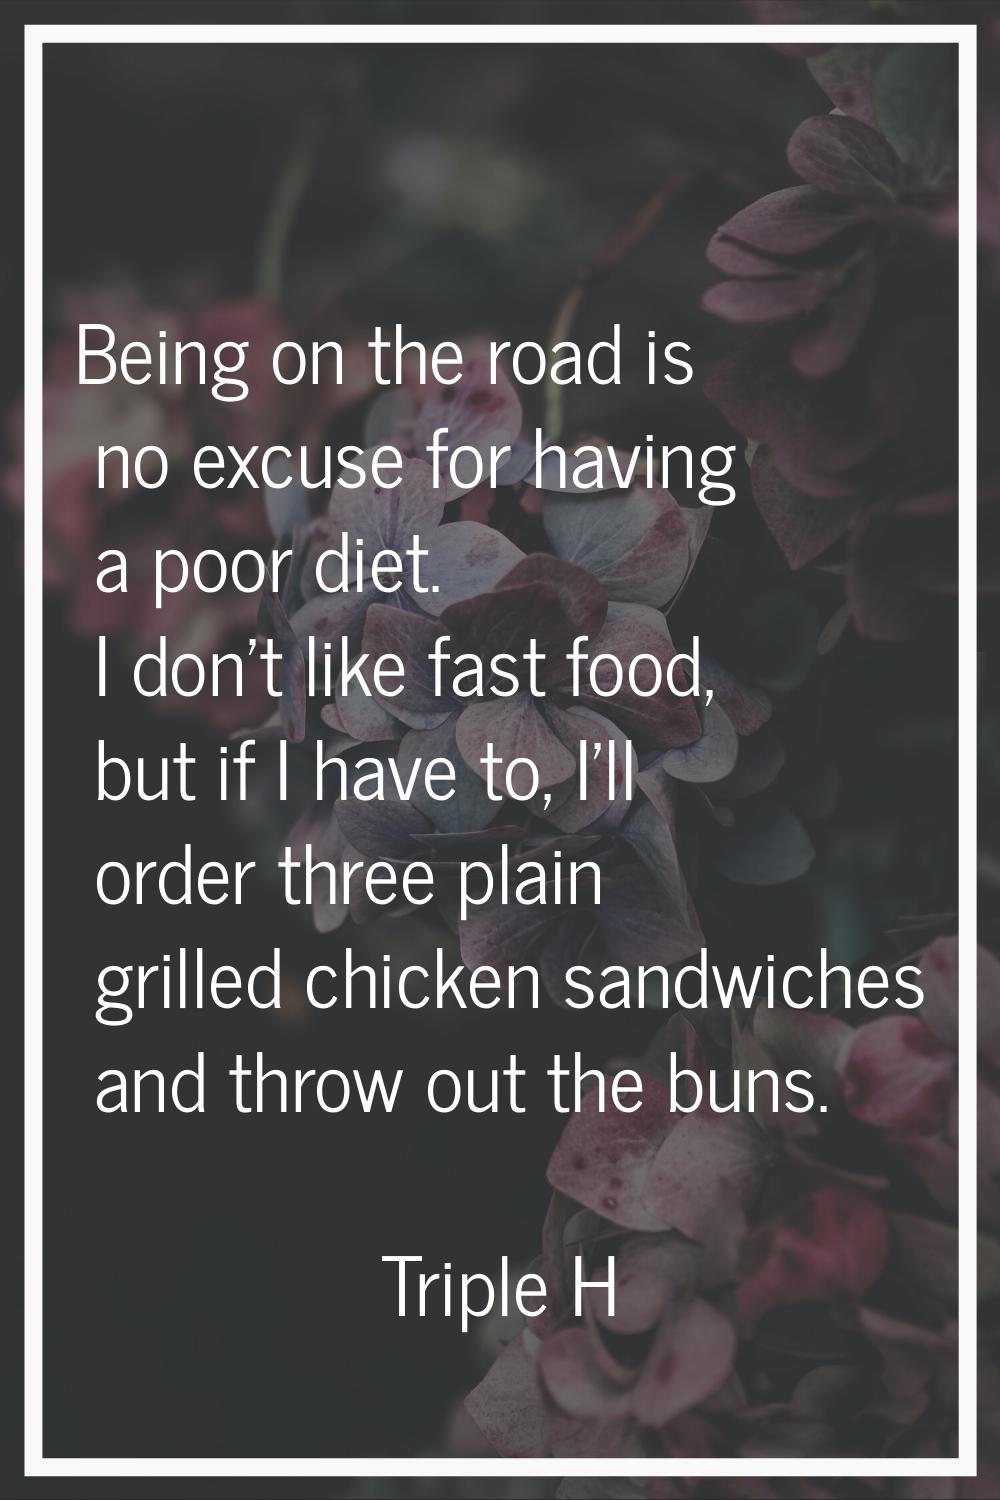 Being on the road is no excuse for having a poor diet. I don't like fast food, but if I have to, I'